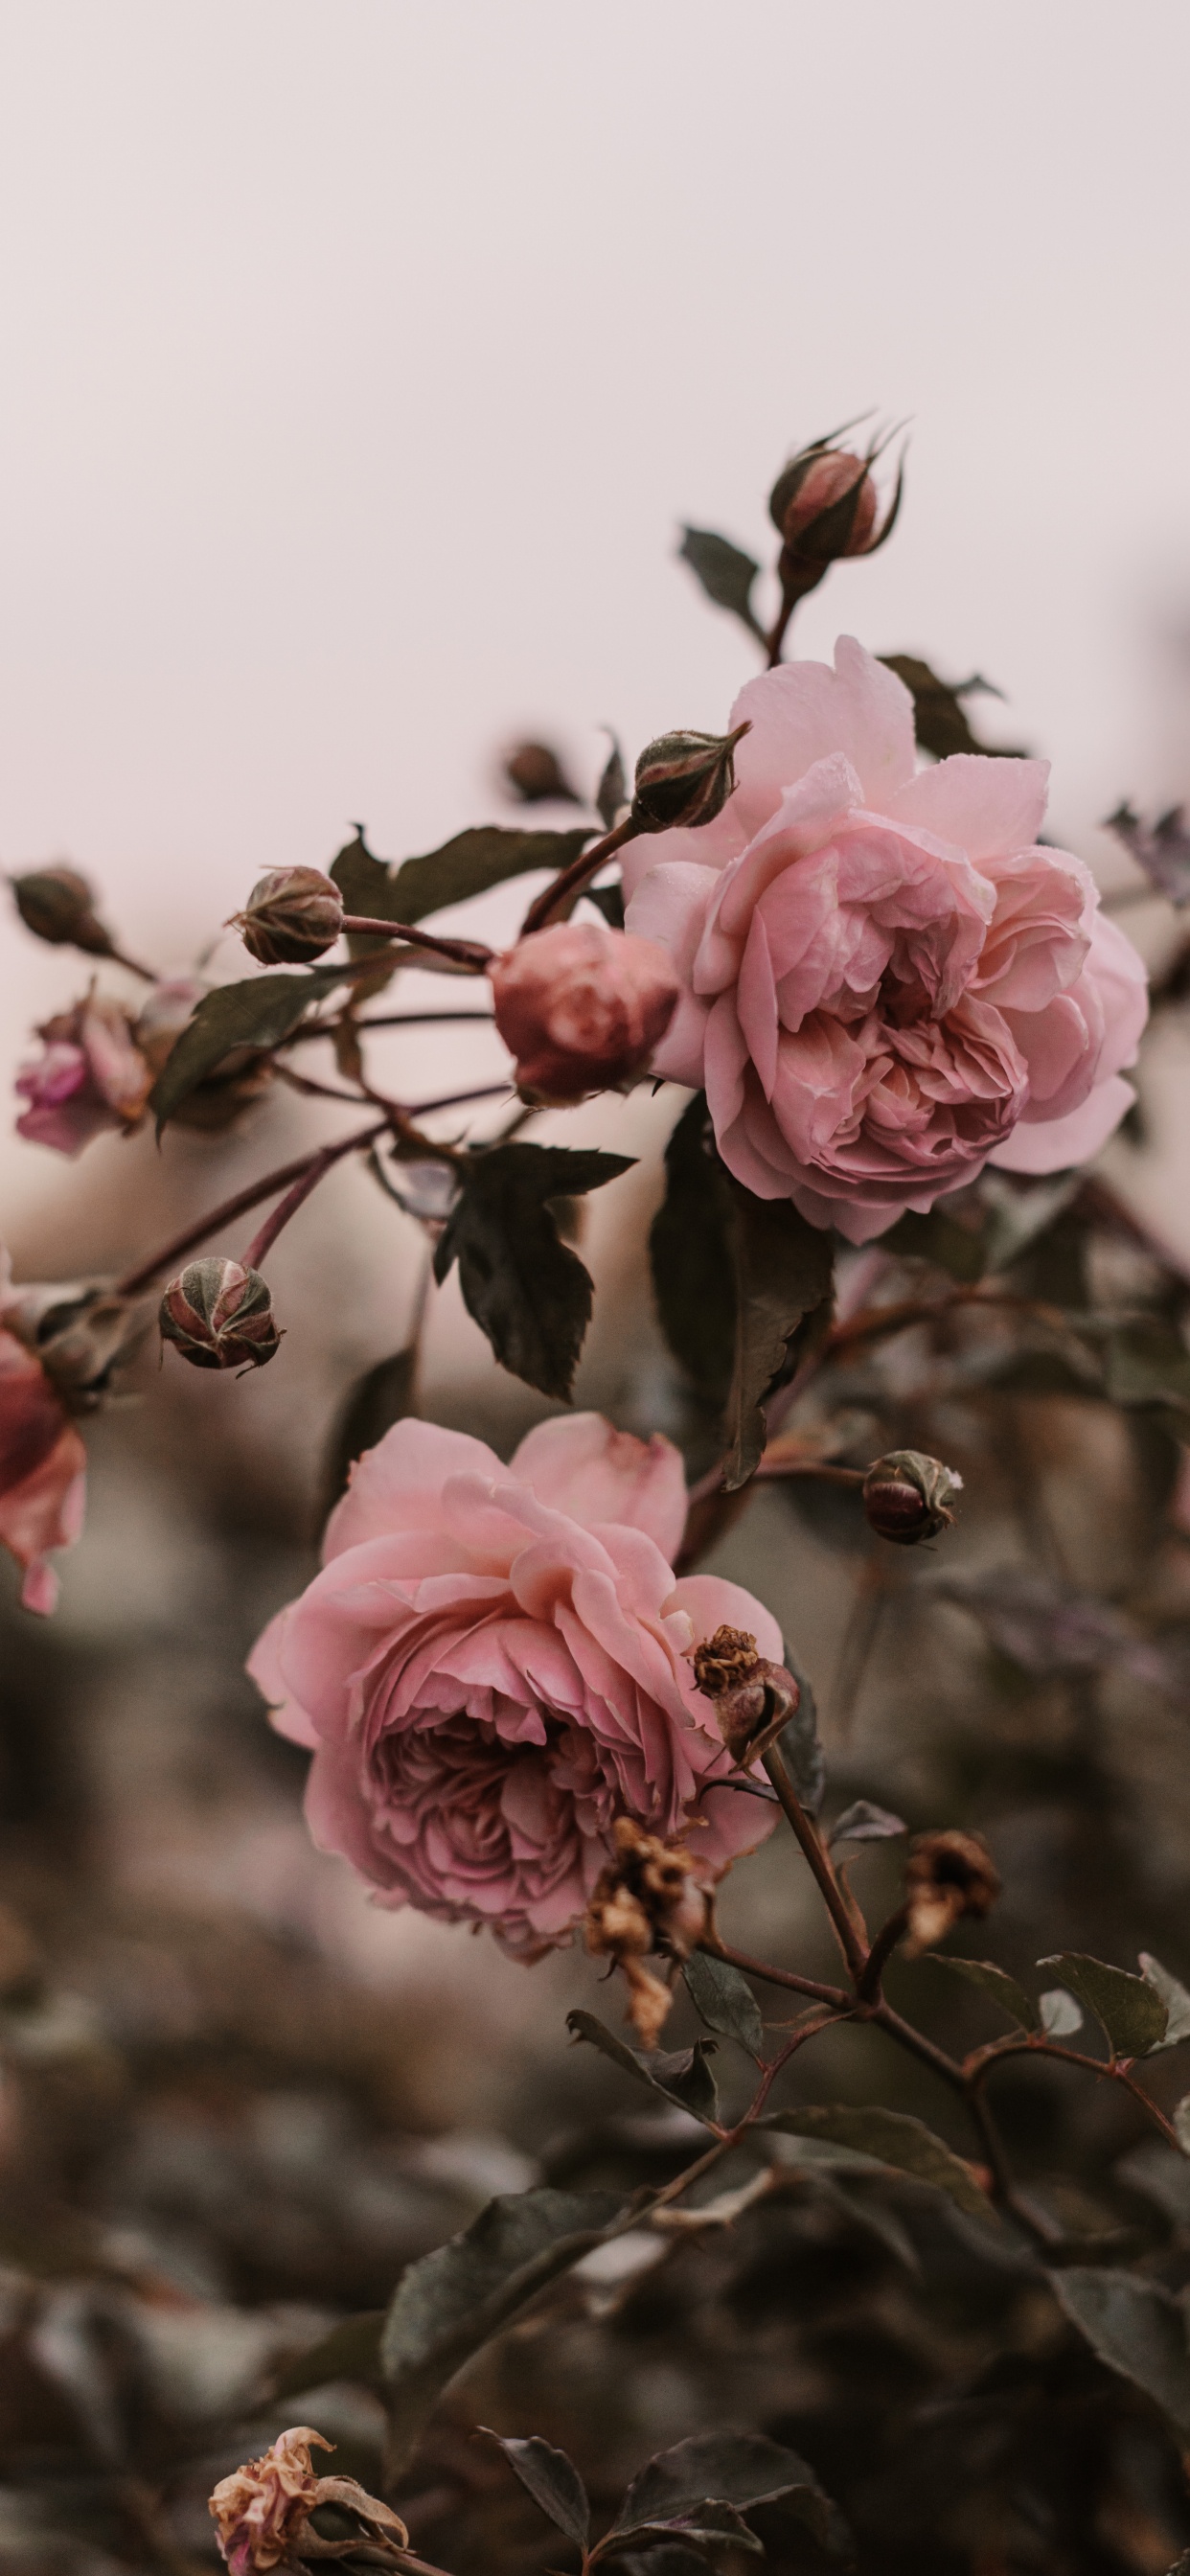 Pink Roses in Bloom During Daytime. Wallpaper in 1242x2688 Resolution